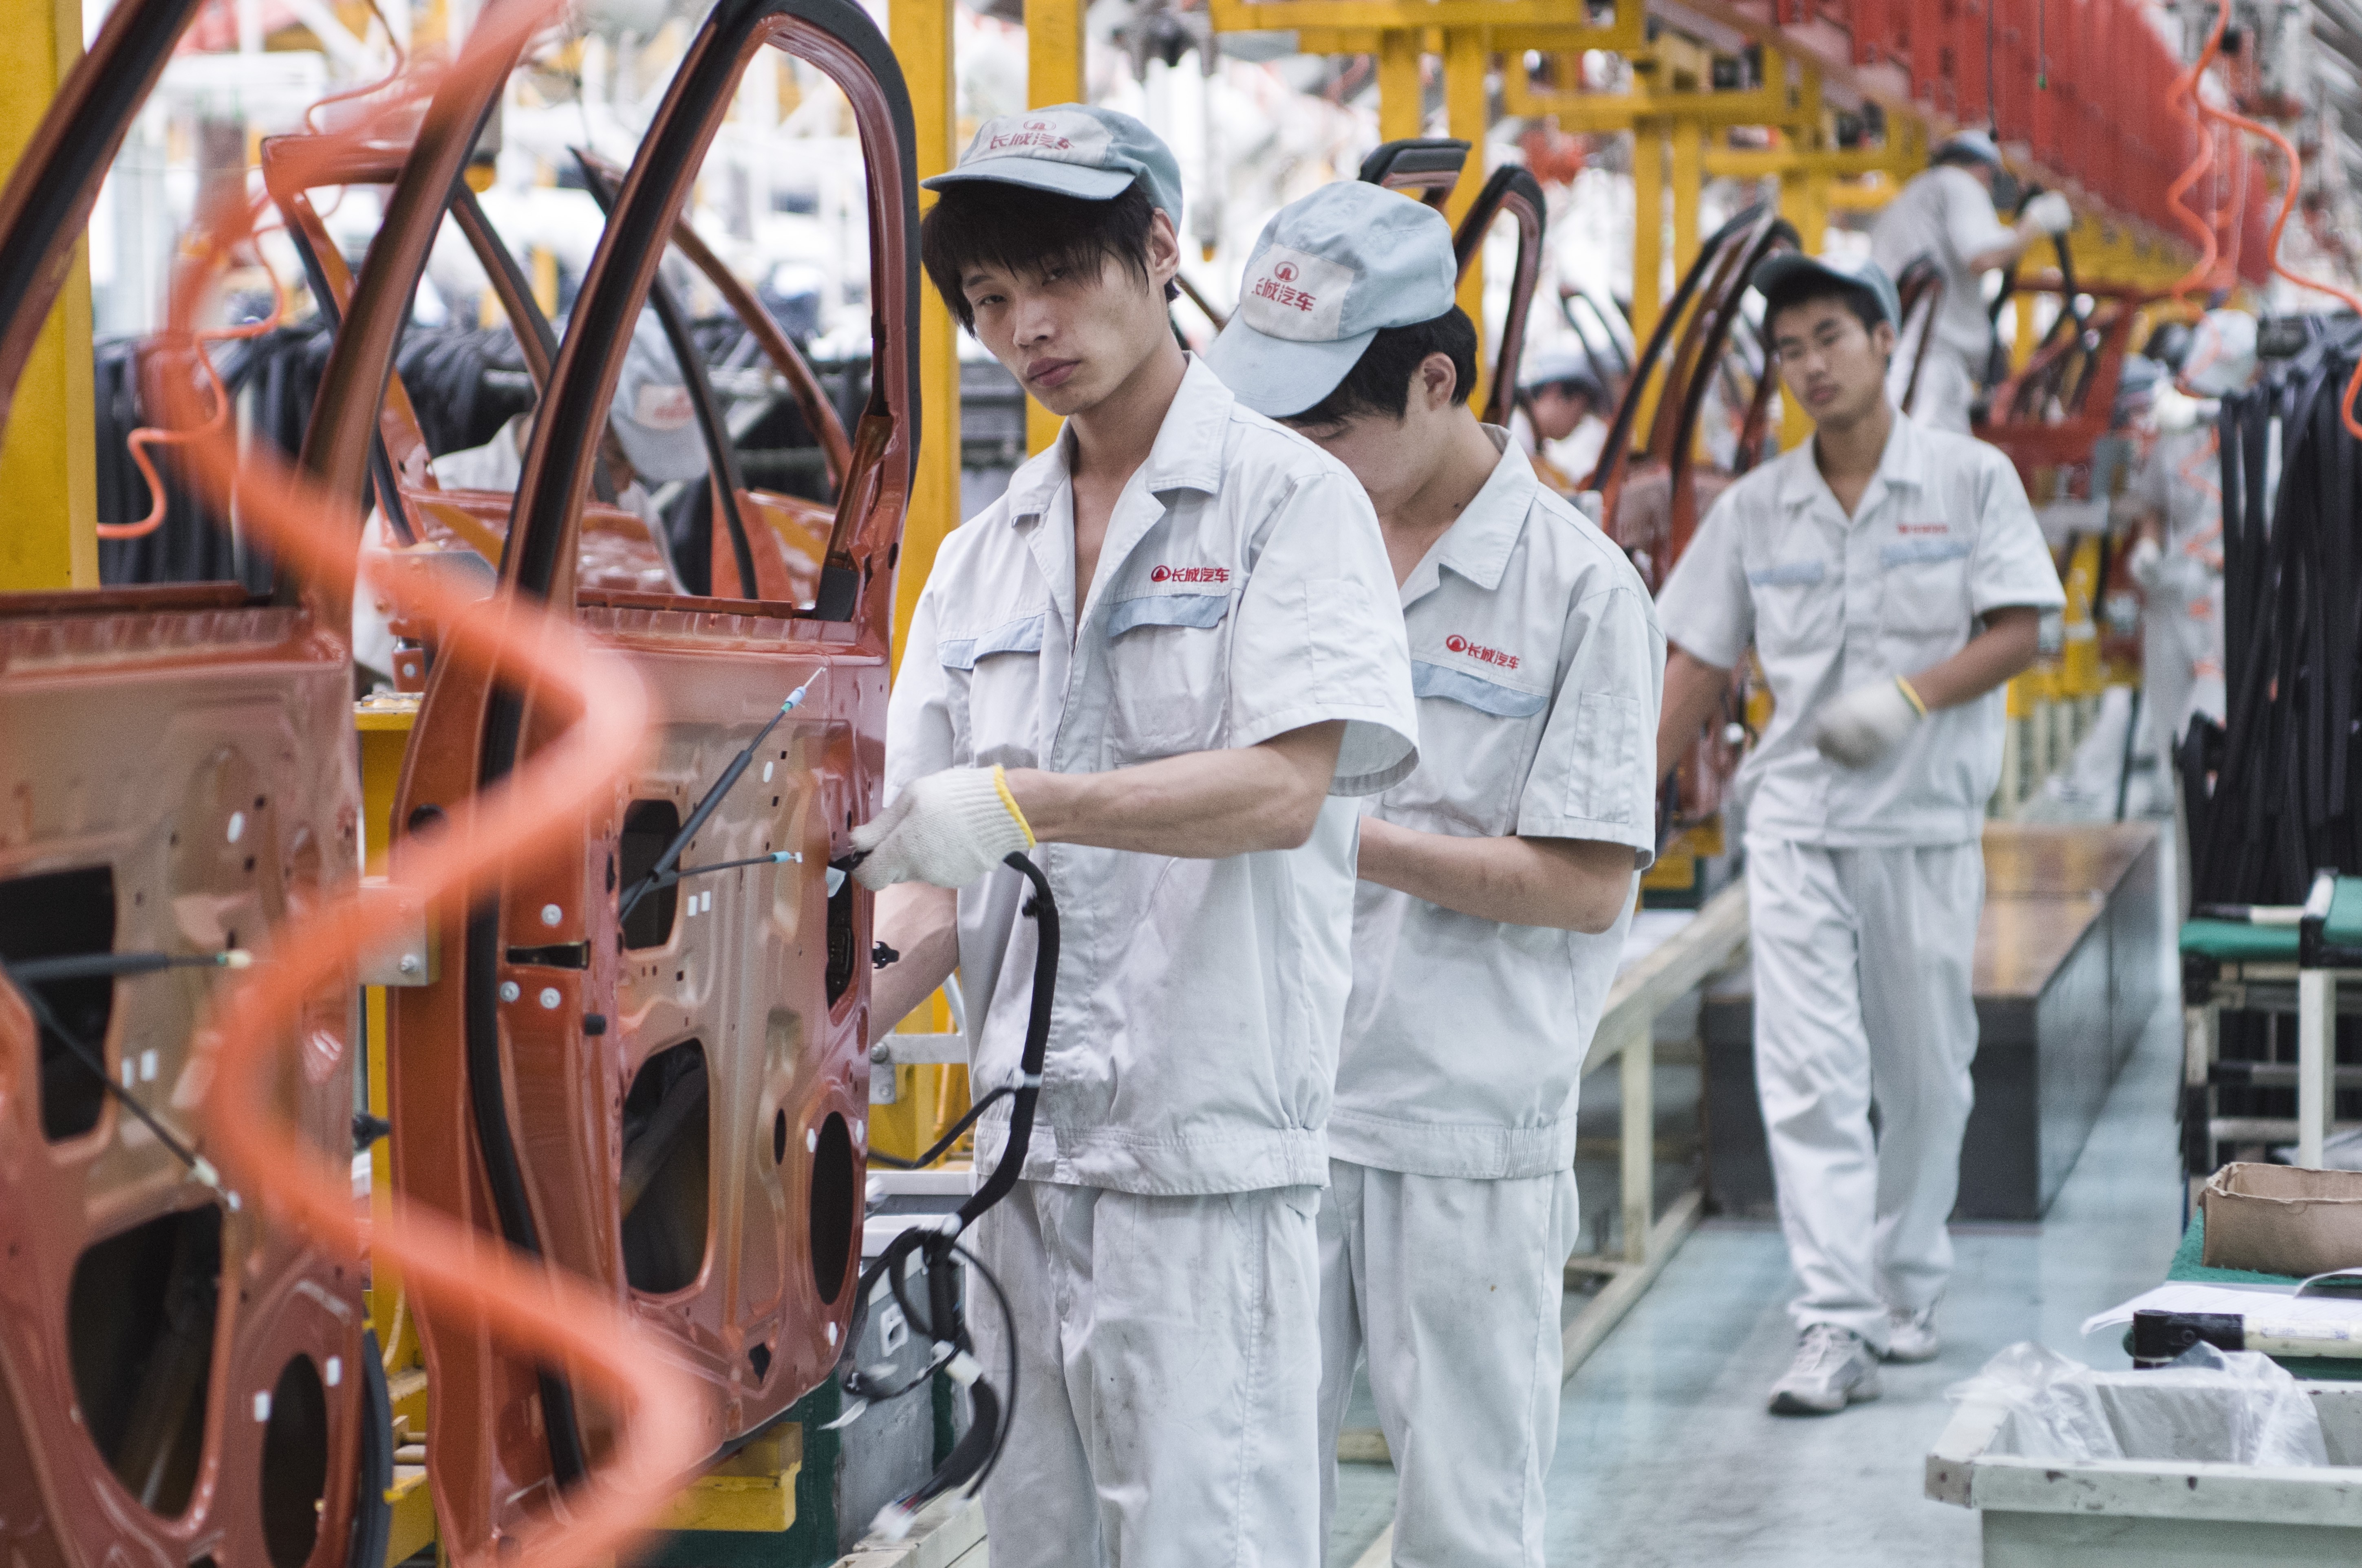 While the ‘Made in China’ label has long held negative connotations, the newly embraced ‘Created in China’ designation celebrates a nation that is blazing a trail in manufacturing, technology and the new economy